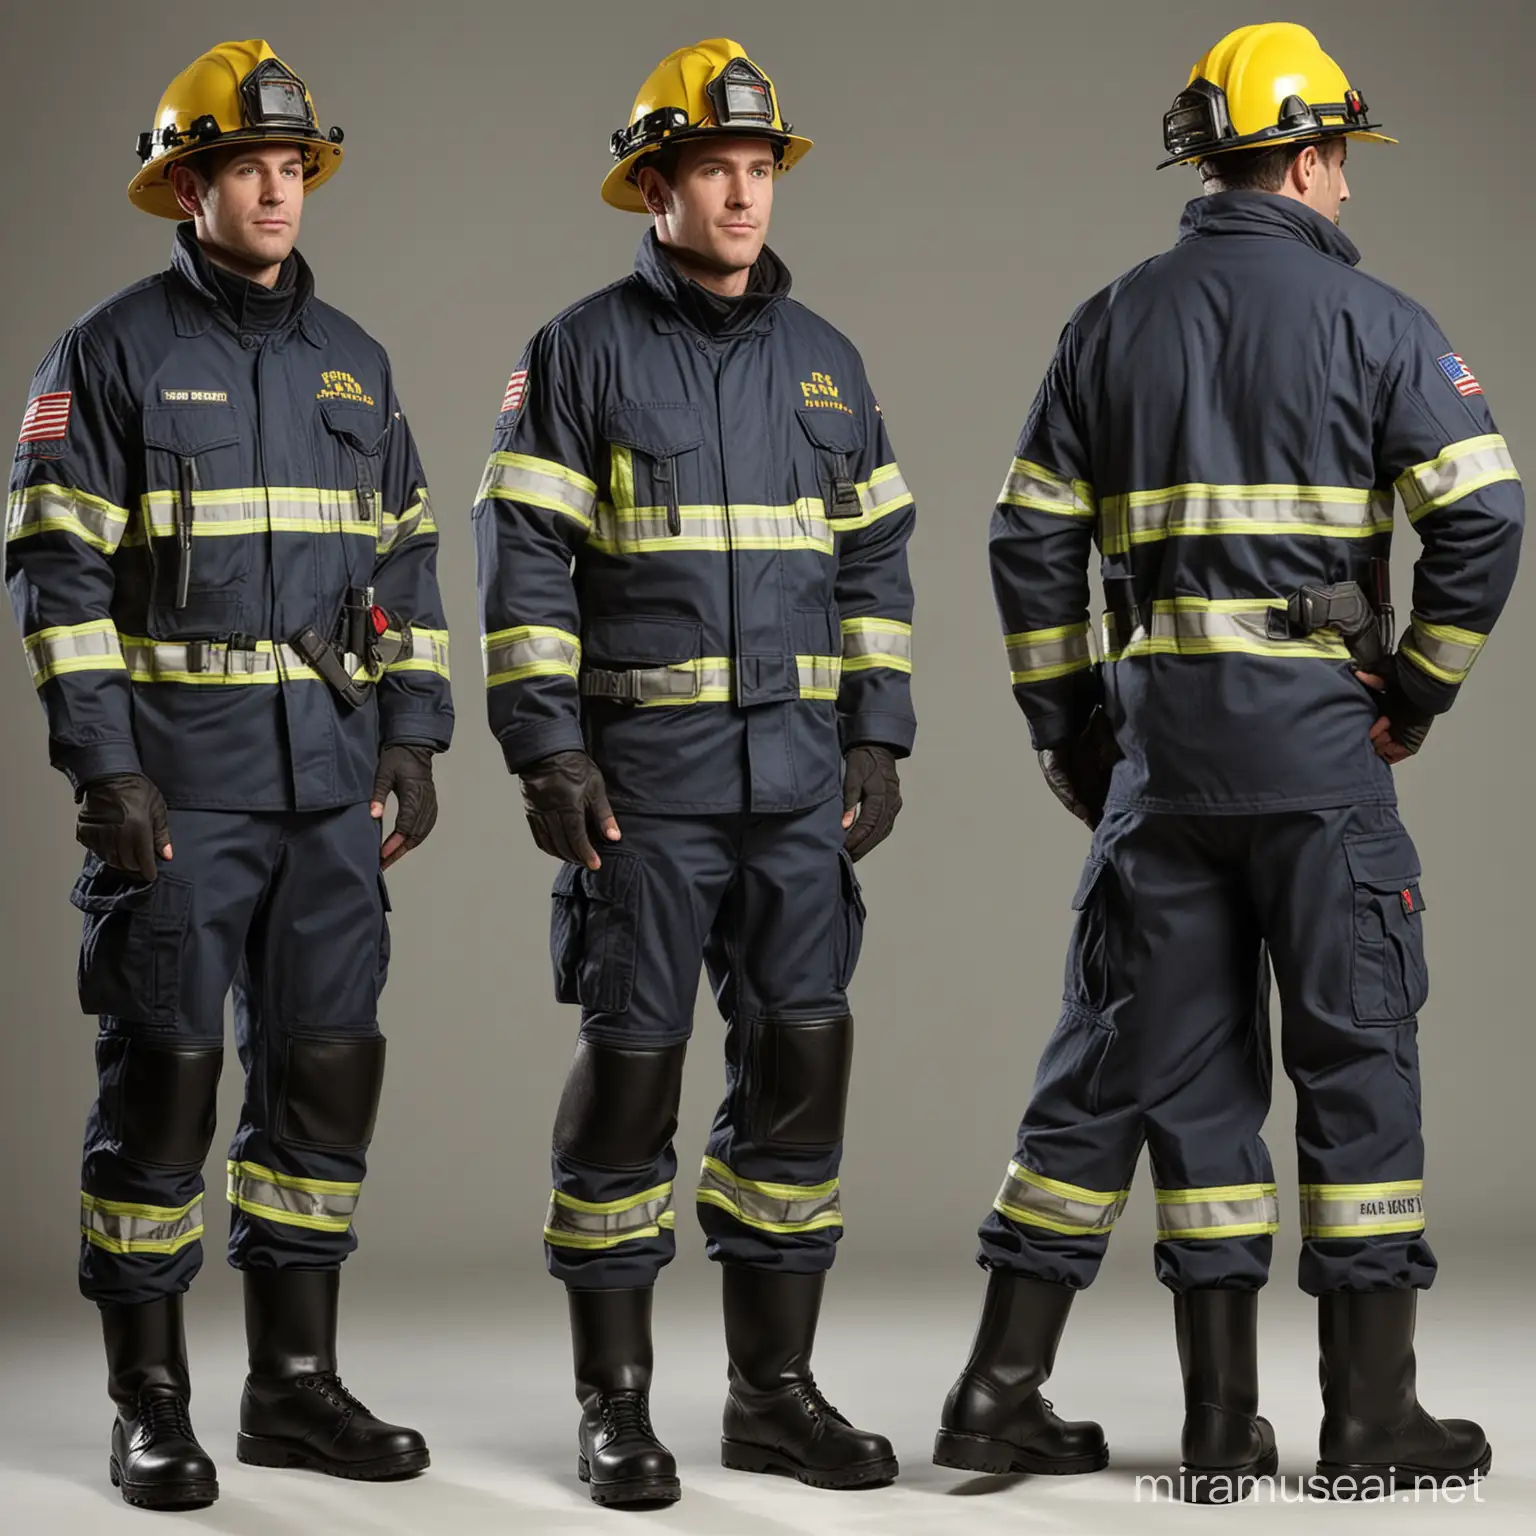 Professional Firefighter Uniforms Safety Durability and Readiness in Action